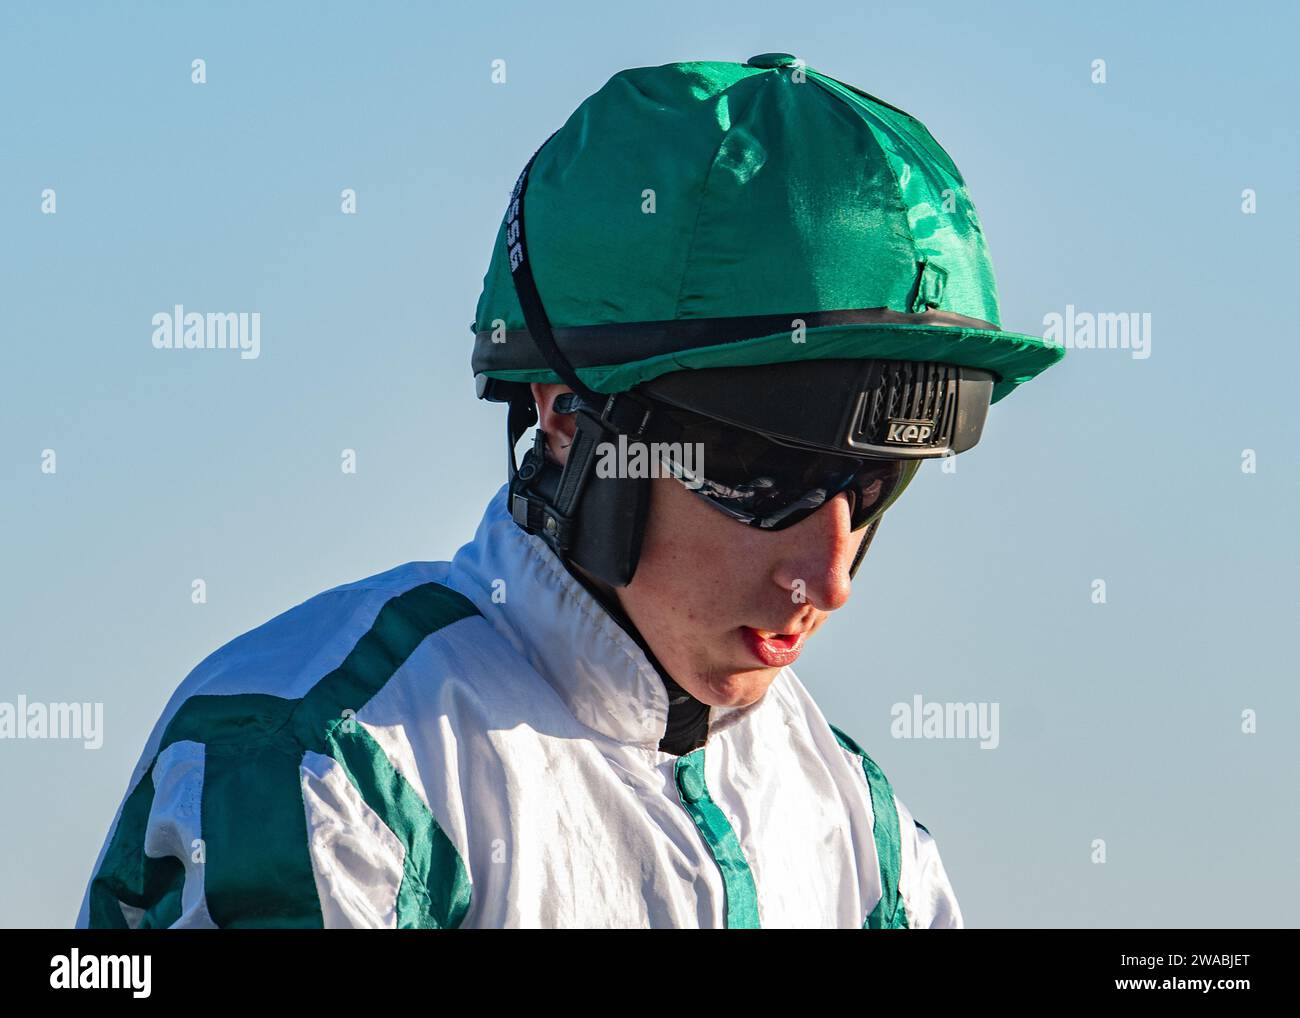 Jockey William Maggs heads to post at Doncaster Racecourse Stock Photo